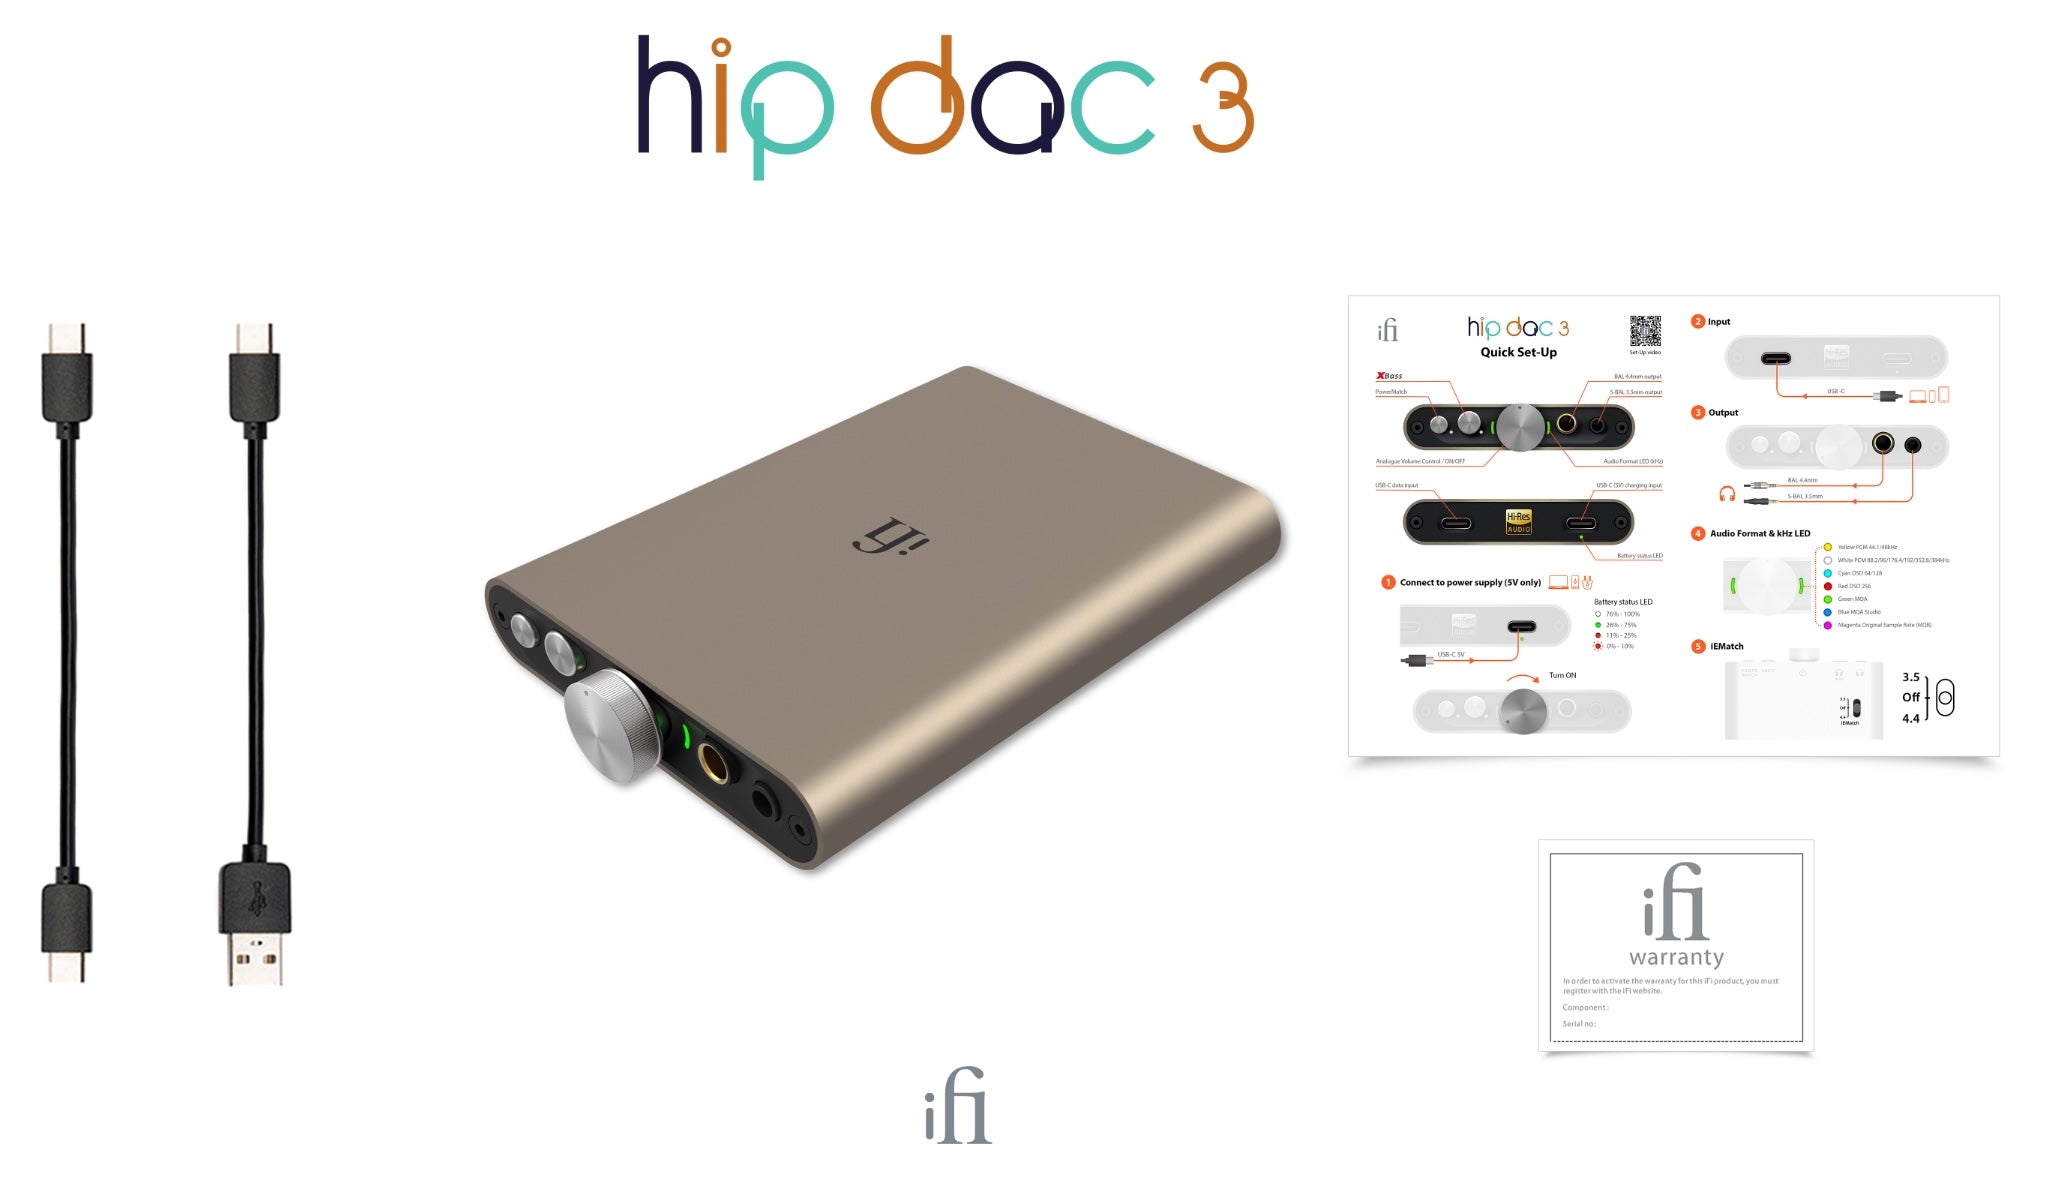 iFi hip-dac 3 and all accessories